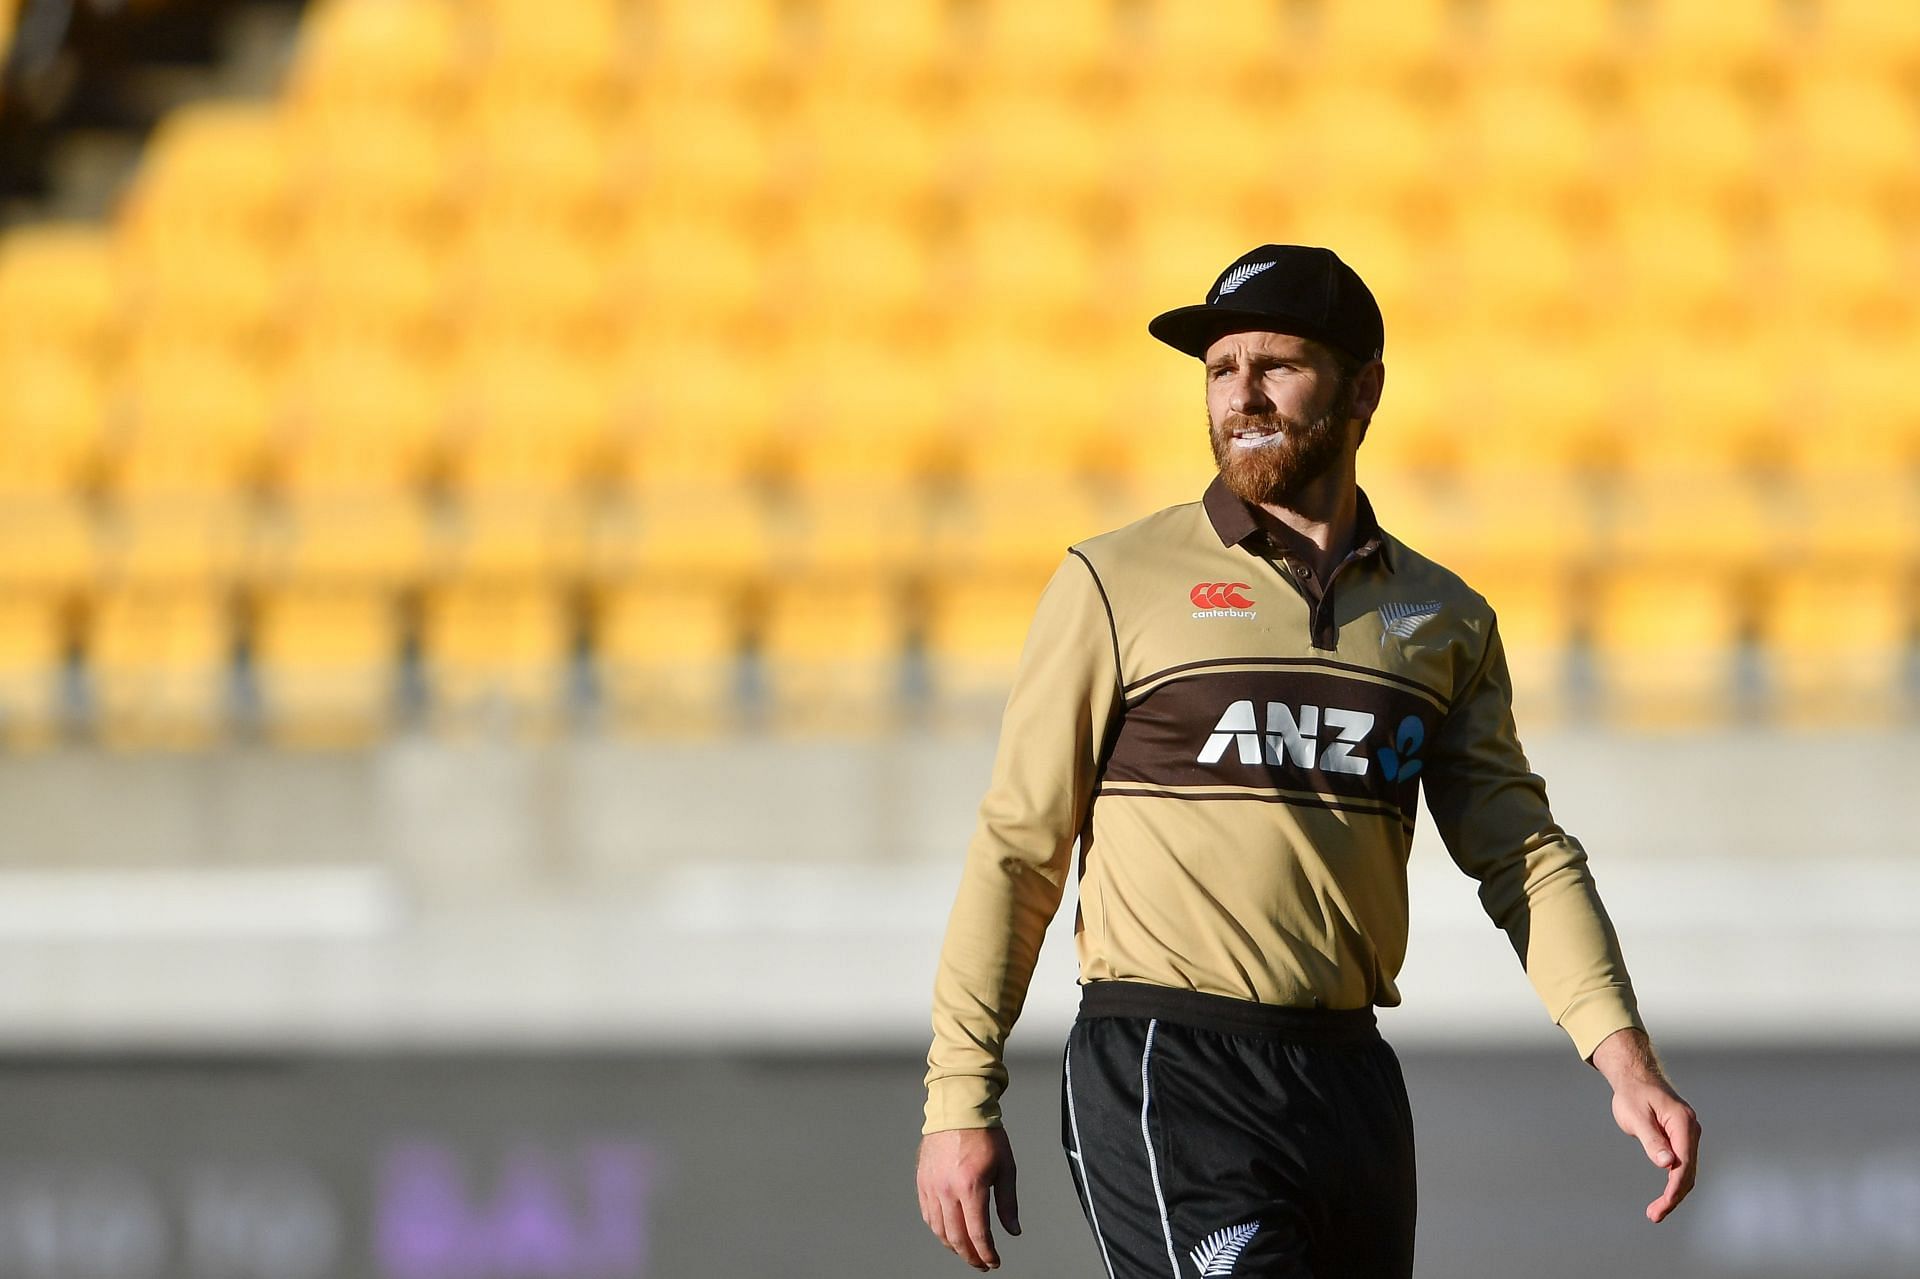 NZ captain Kane Williamson will be looking to fire in this match.